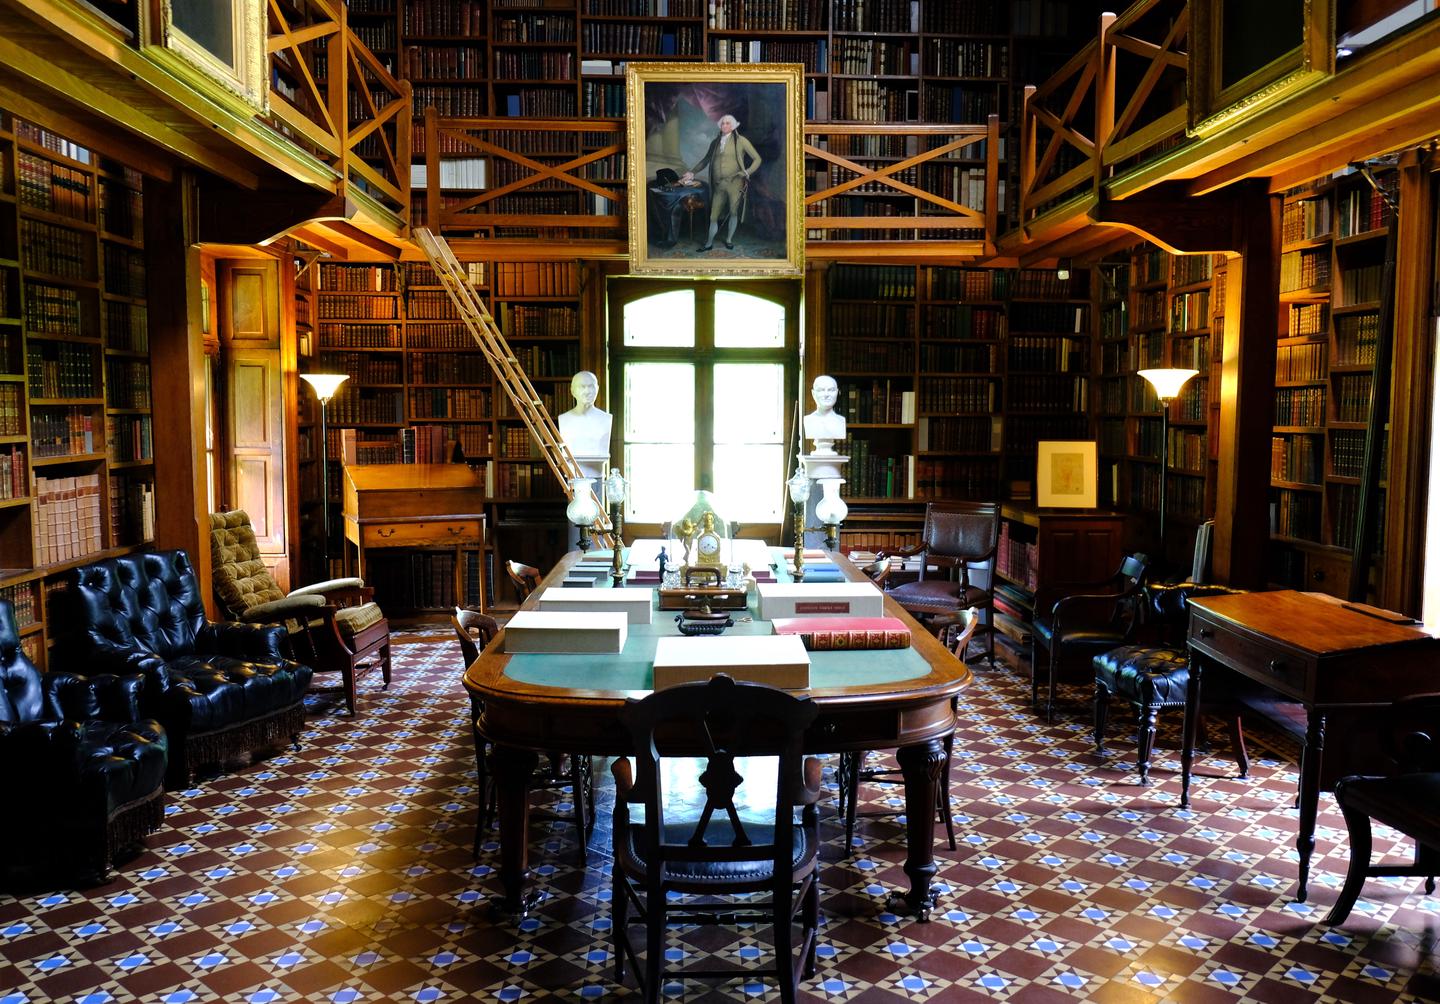 A dark room with tile floors, desks, and chairs. A long table sits at the center. Books on shelves line the walls. The Stone Library at Peace field houses the books of John Quincy Adams and other family mementoes. 